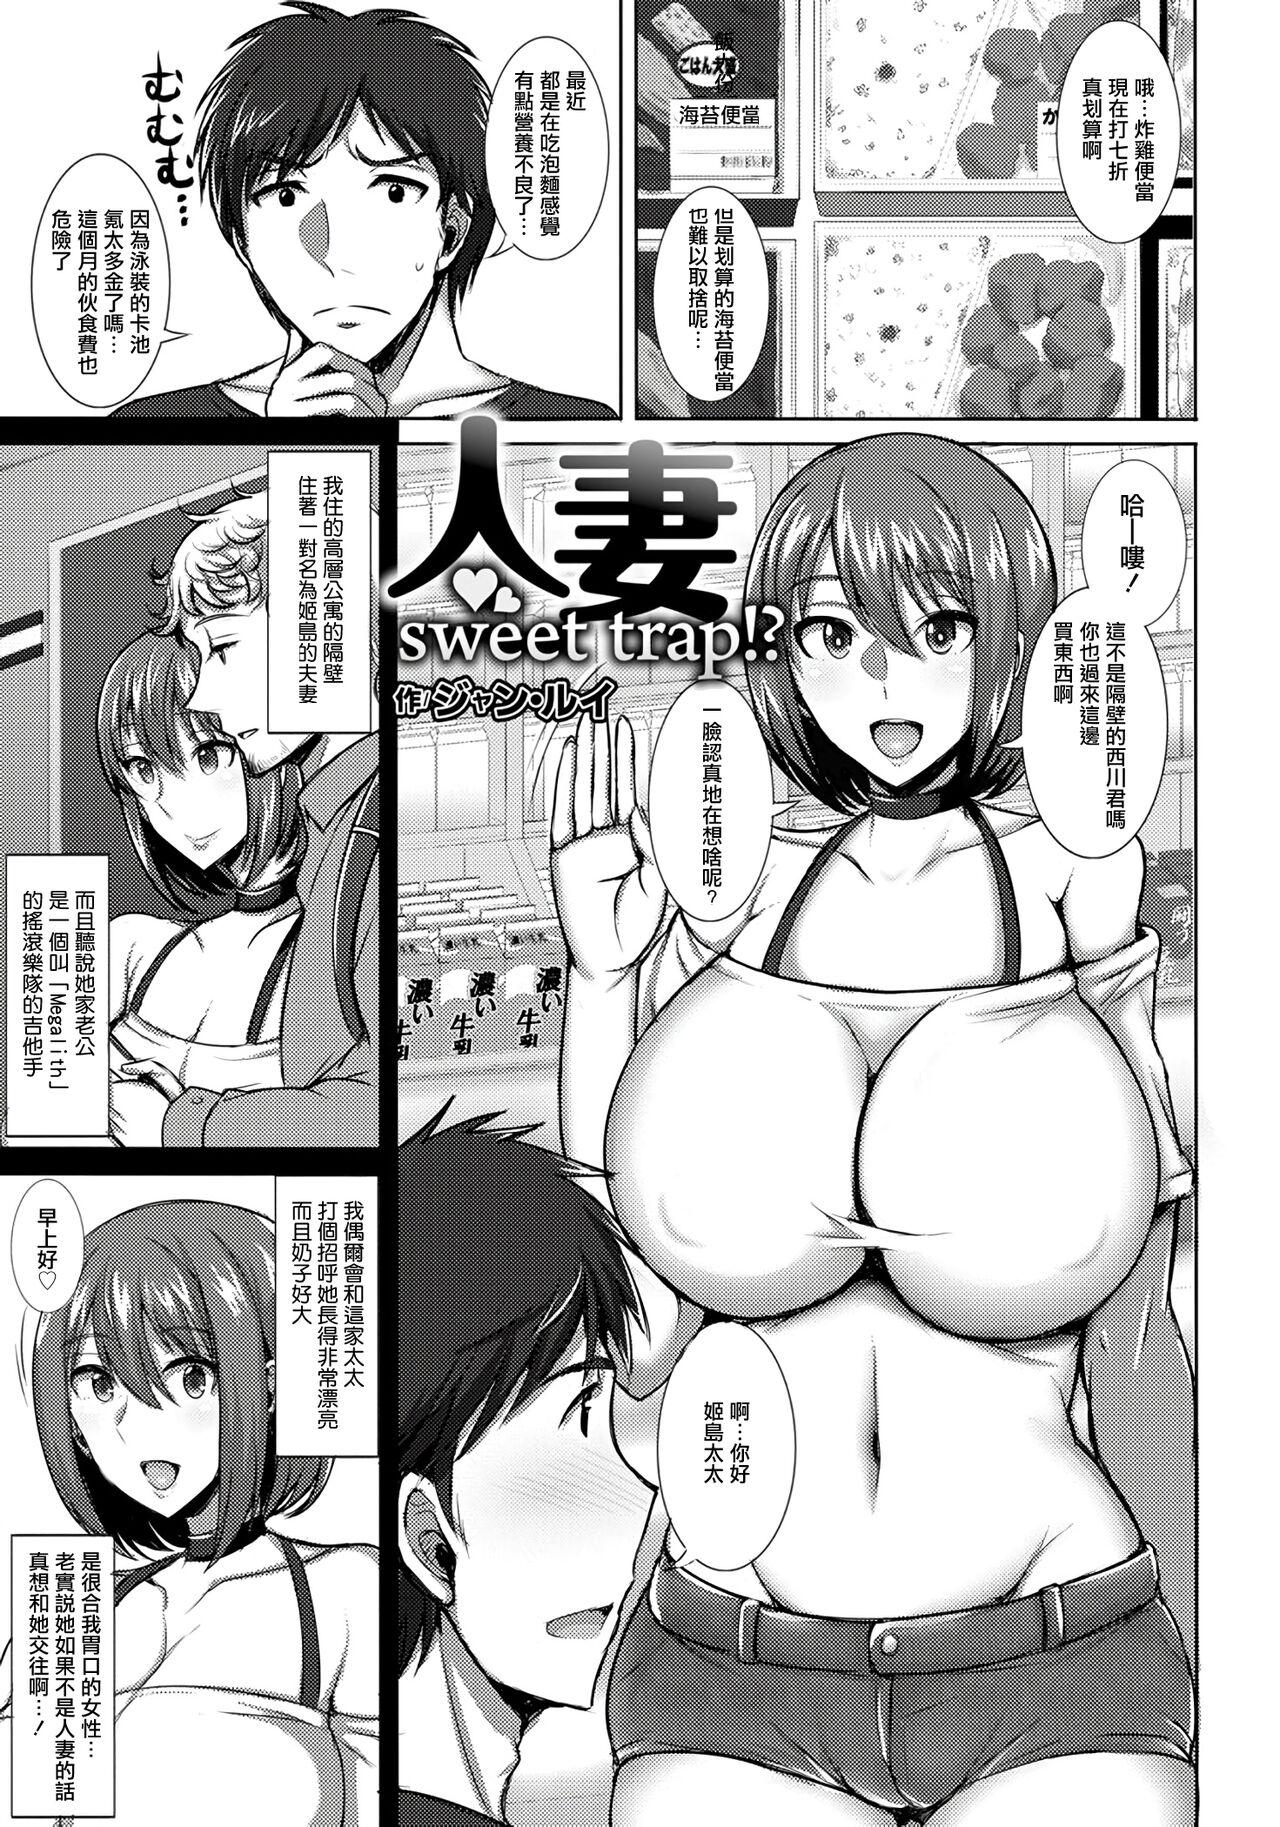 Glamour 人妻sweet trap！？ Glasses - Page 1